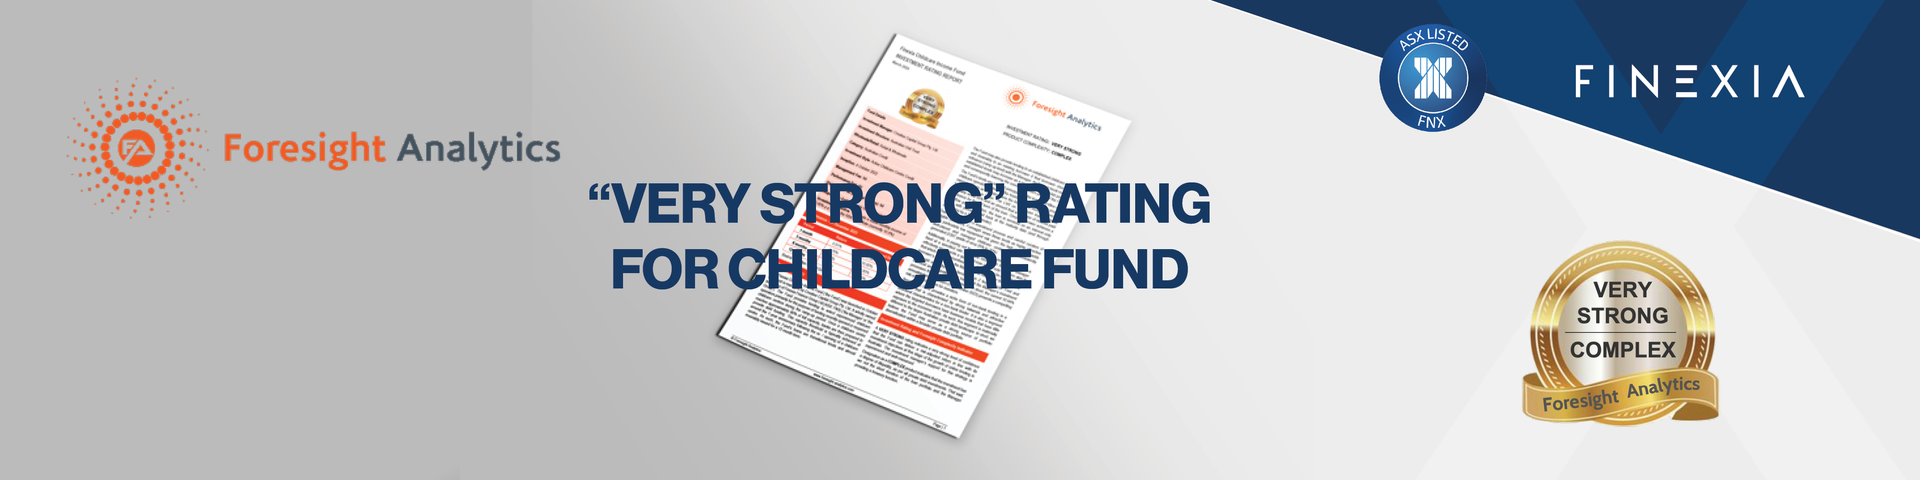 Finexia Childcare Income Fund receives ratings validation from Foresight Analytics & Ratings